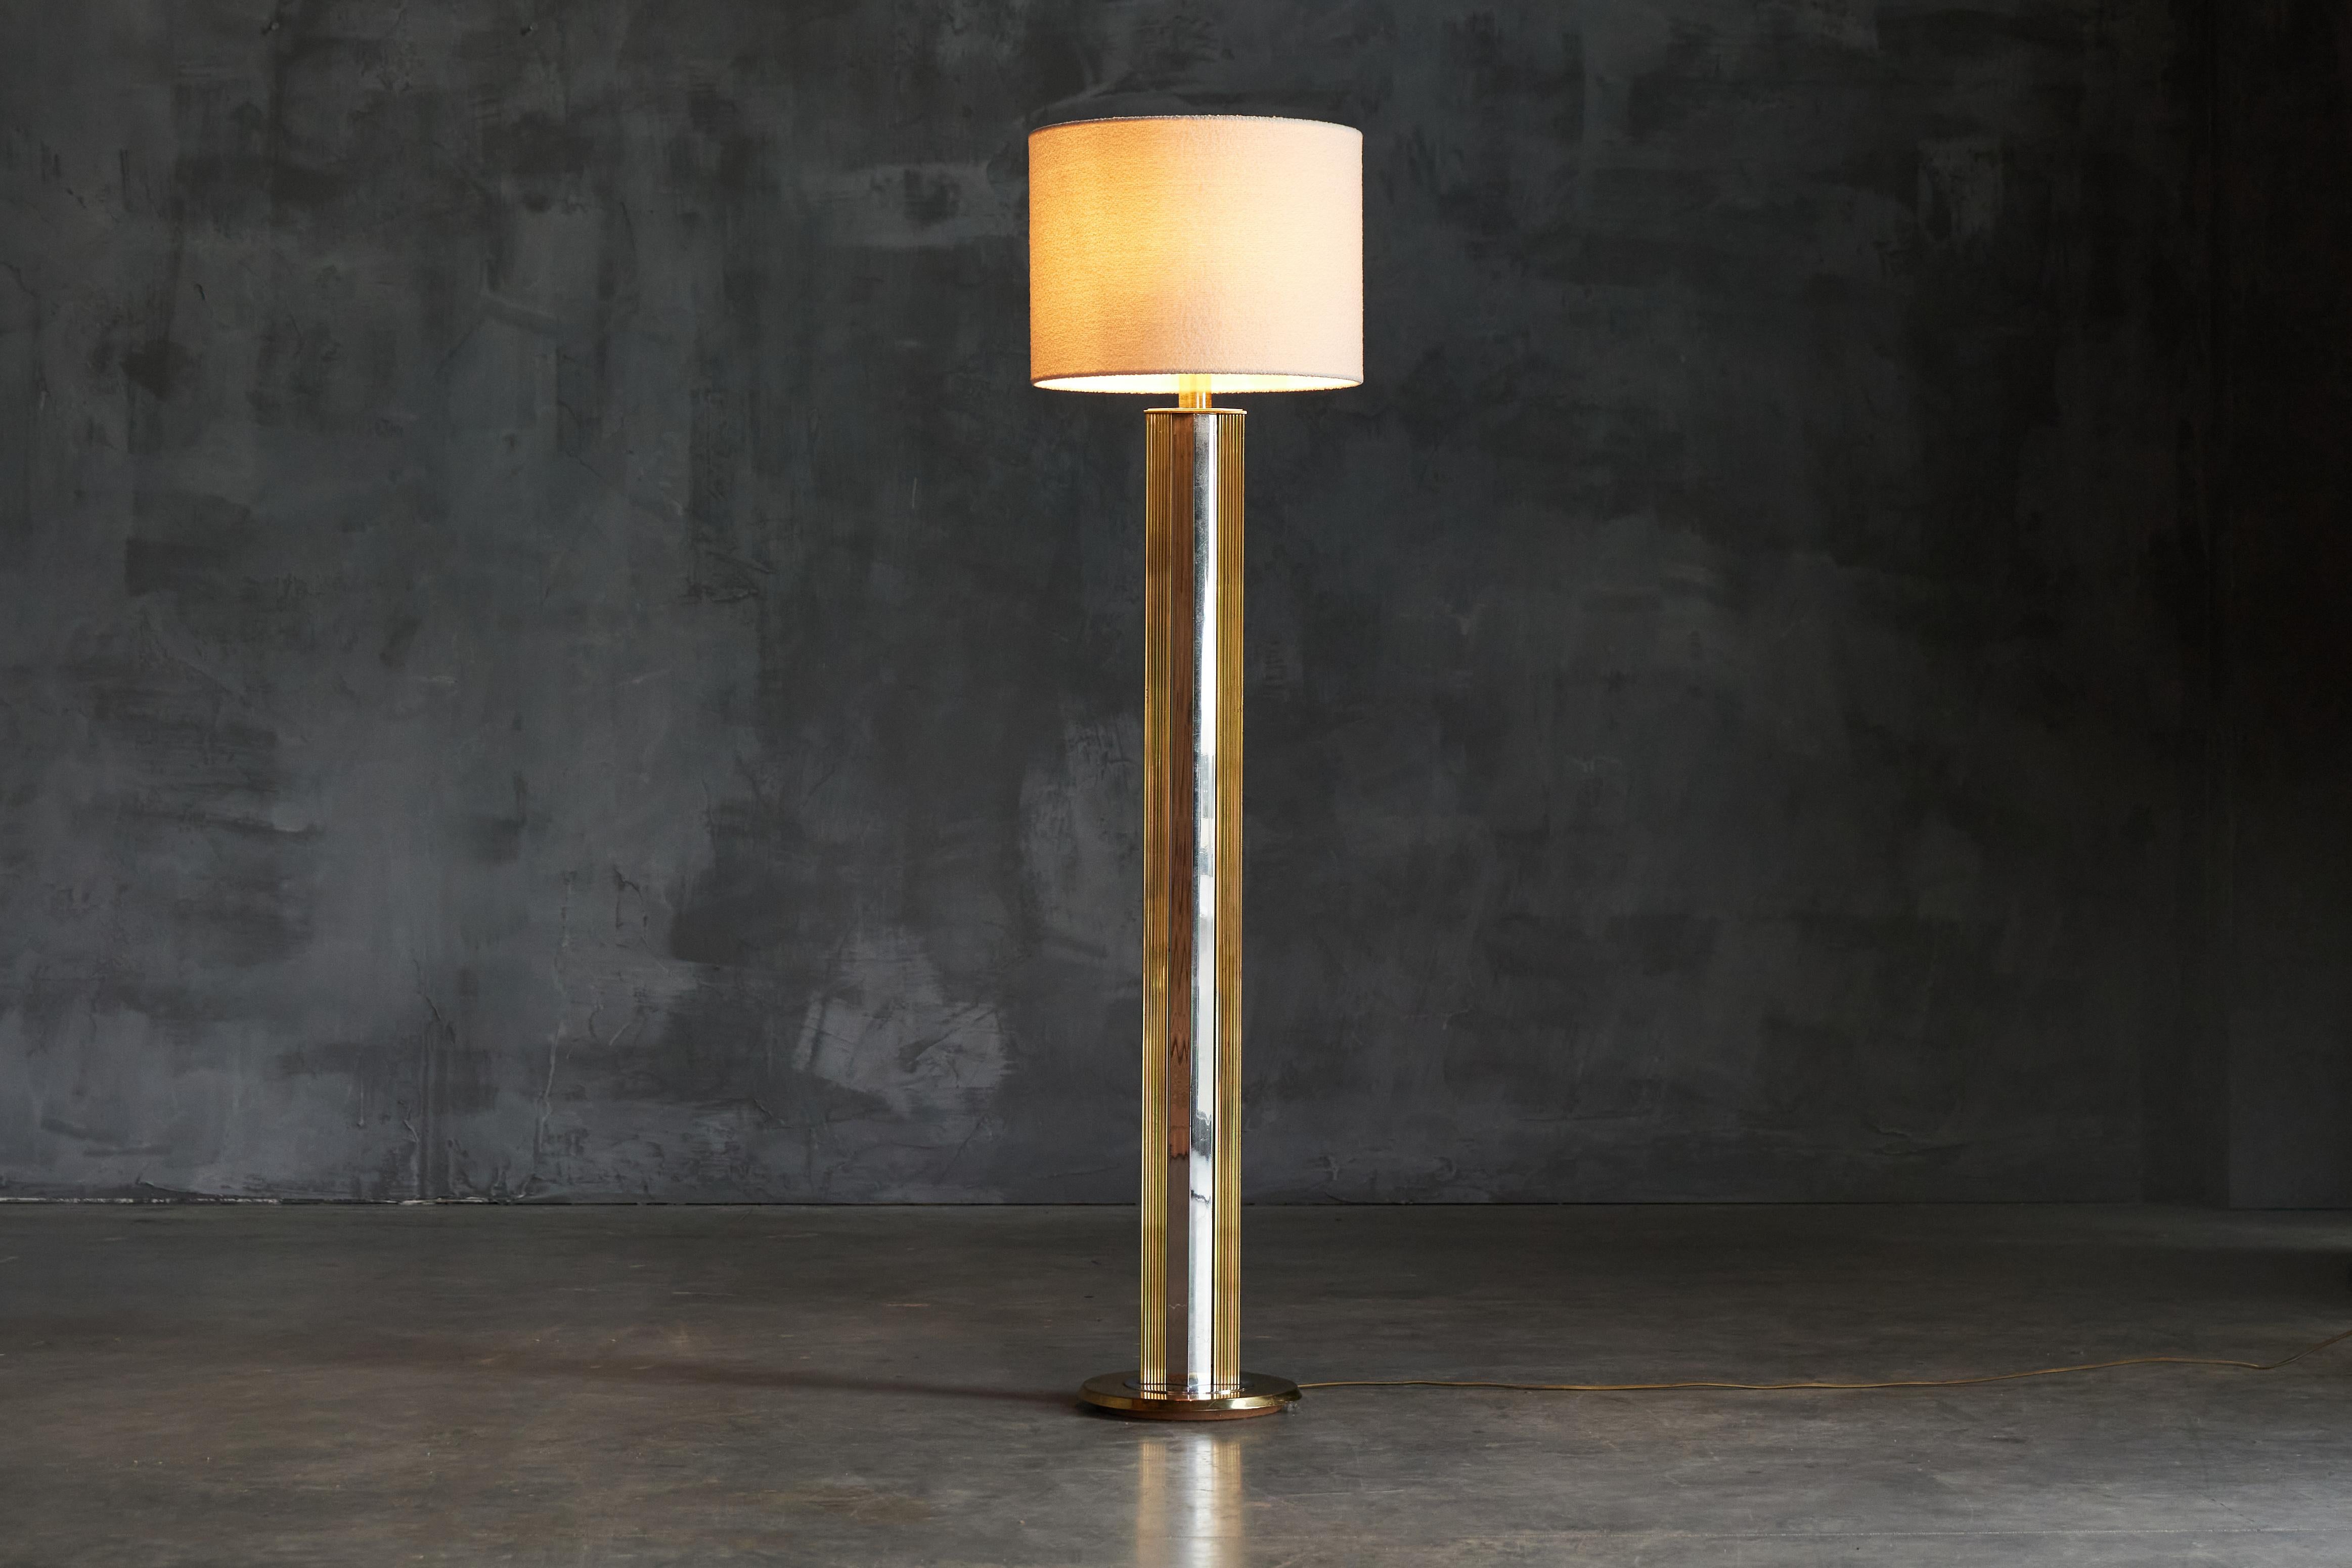 Step back in time to the opulent era of the 1970s with our brass regency floor lamp. Its base features a blend of silver and gold finishes, exuding an air of vintage charm and sophistication. The round shade of luxurious white bouclé emits a soft,